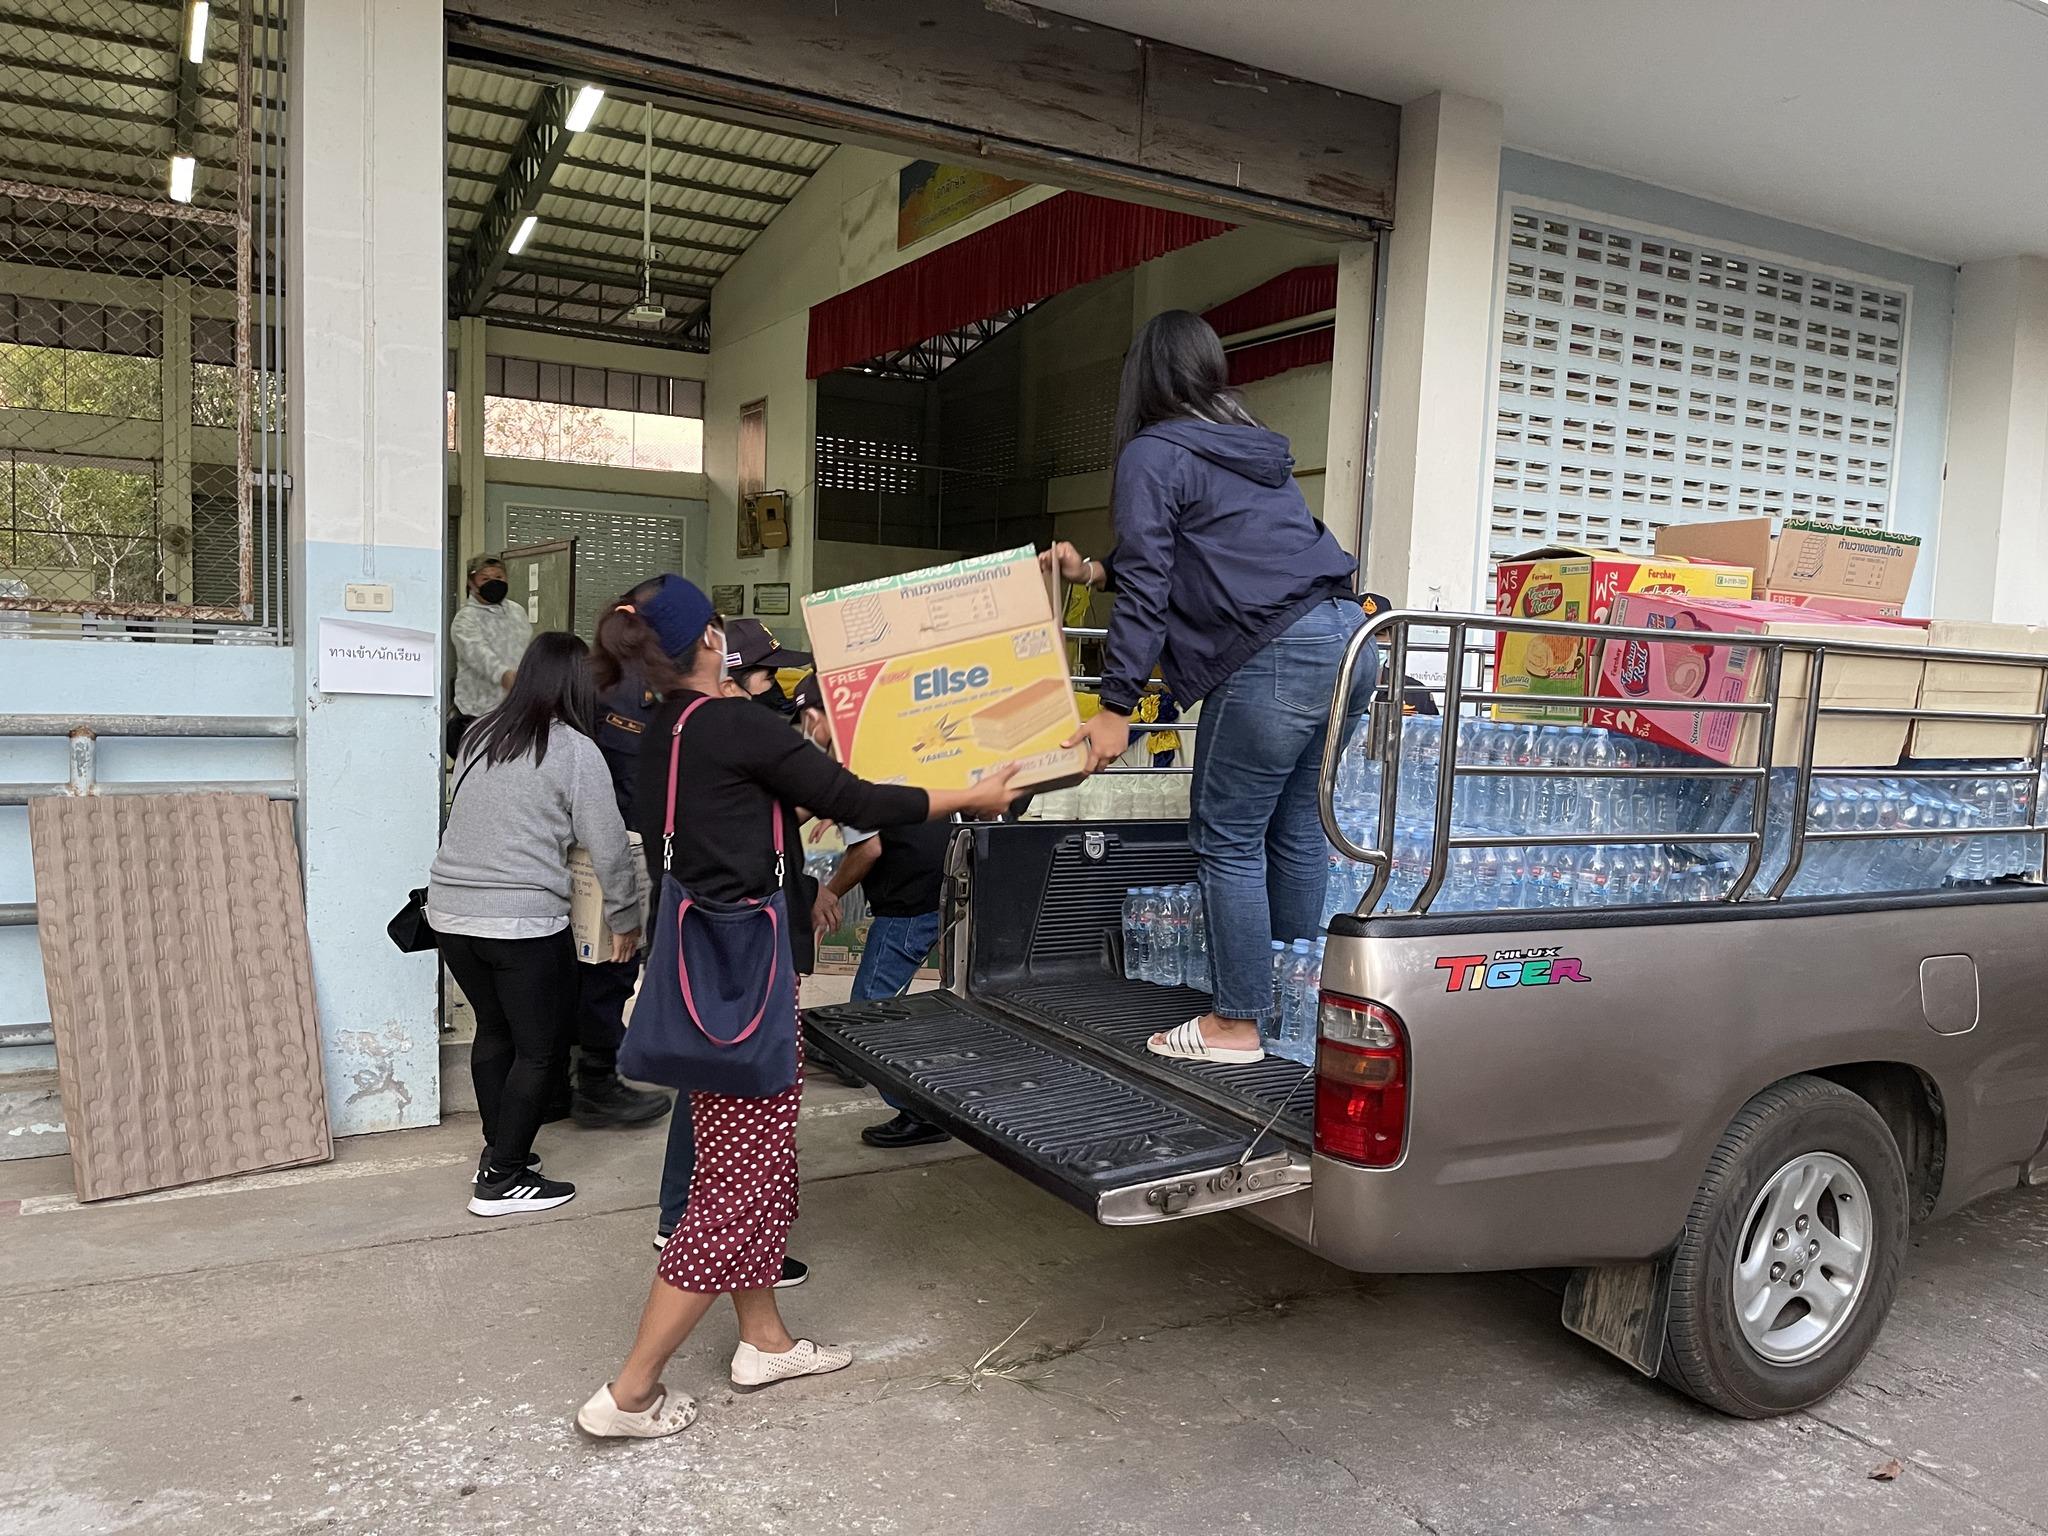 WLB provided some food, clothes, and water to over a thousand people from Lay Kay Kaw who fled to Thailand for safety from the military junta's offensives